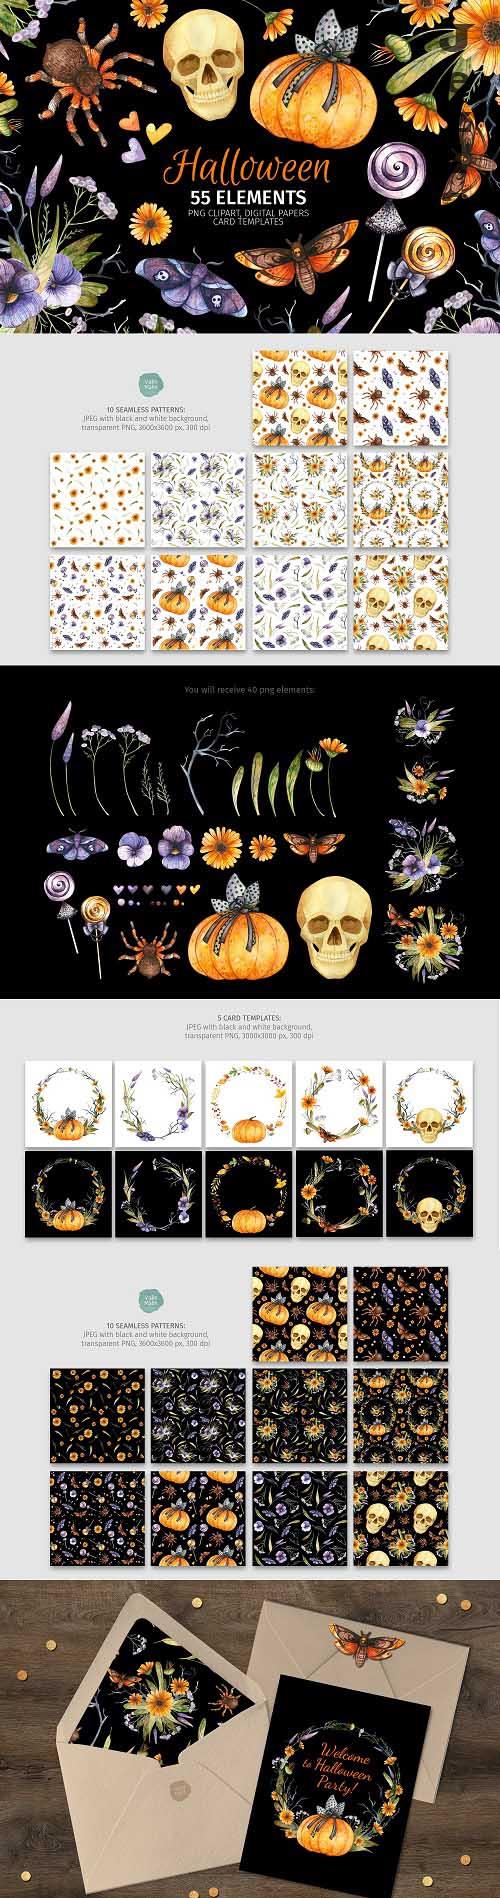 Halloween clipart, seamless patterns and card templates - 1481763